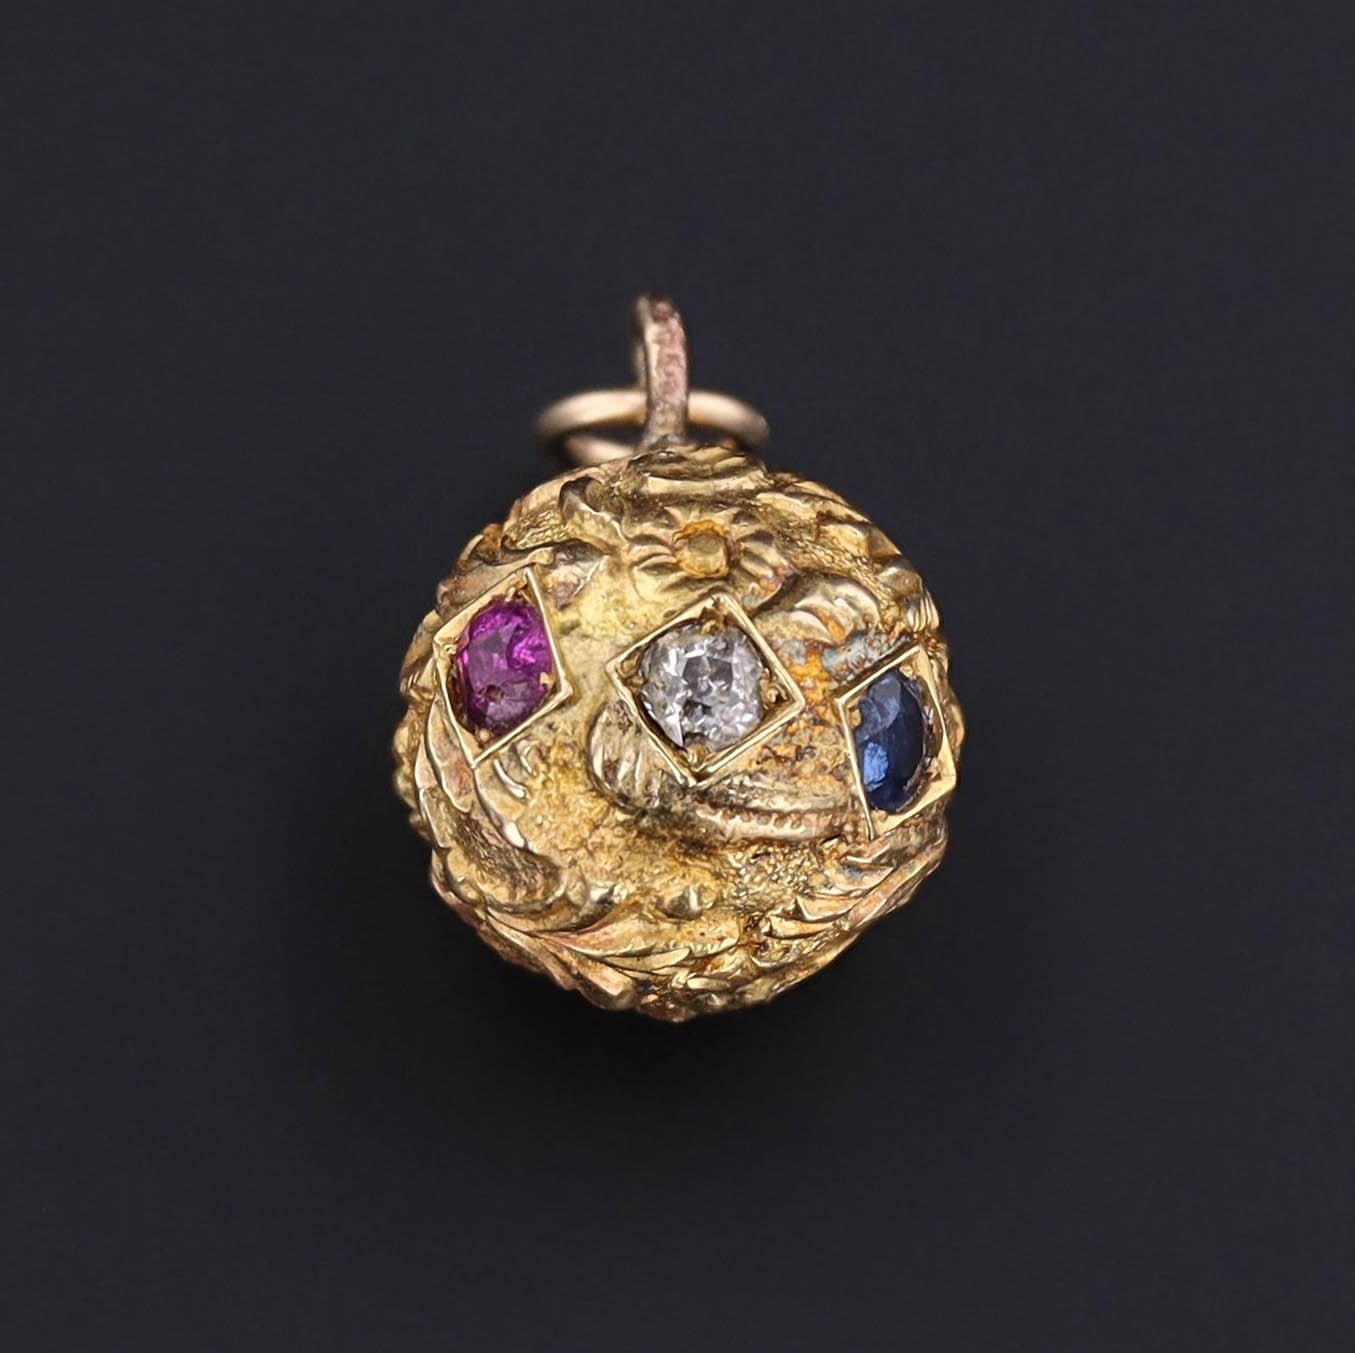 Antique Gold Charm or Pendant | Ball or Orb Charm 